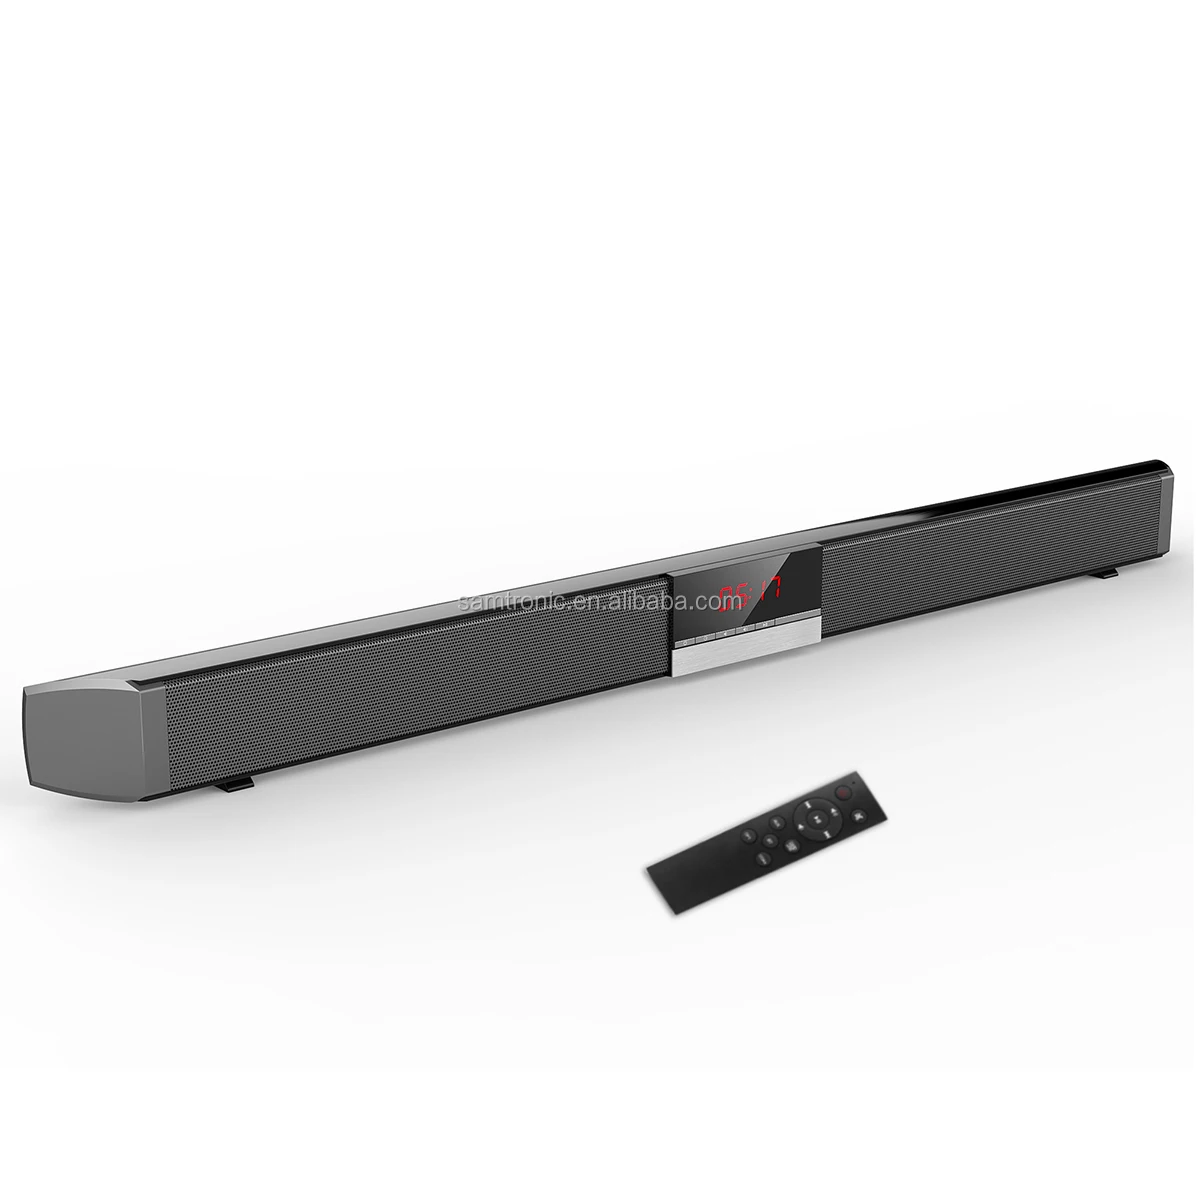 

Soundbar with Built-in Subwoofer, 34 Inch 40-Watts 4.0 Channel Wireless & Wired Sound Bars Home Theater Surround Sound, Black